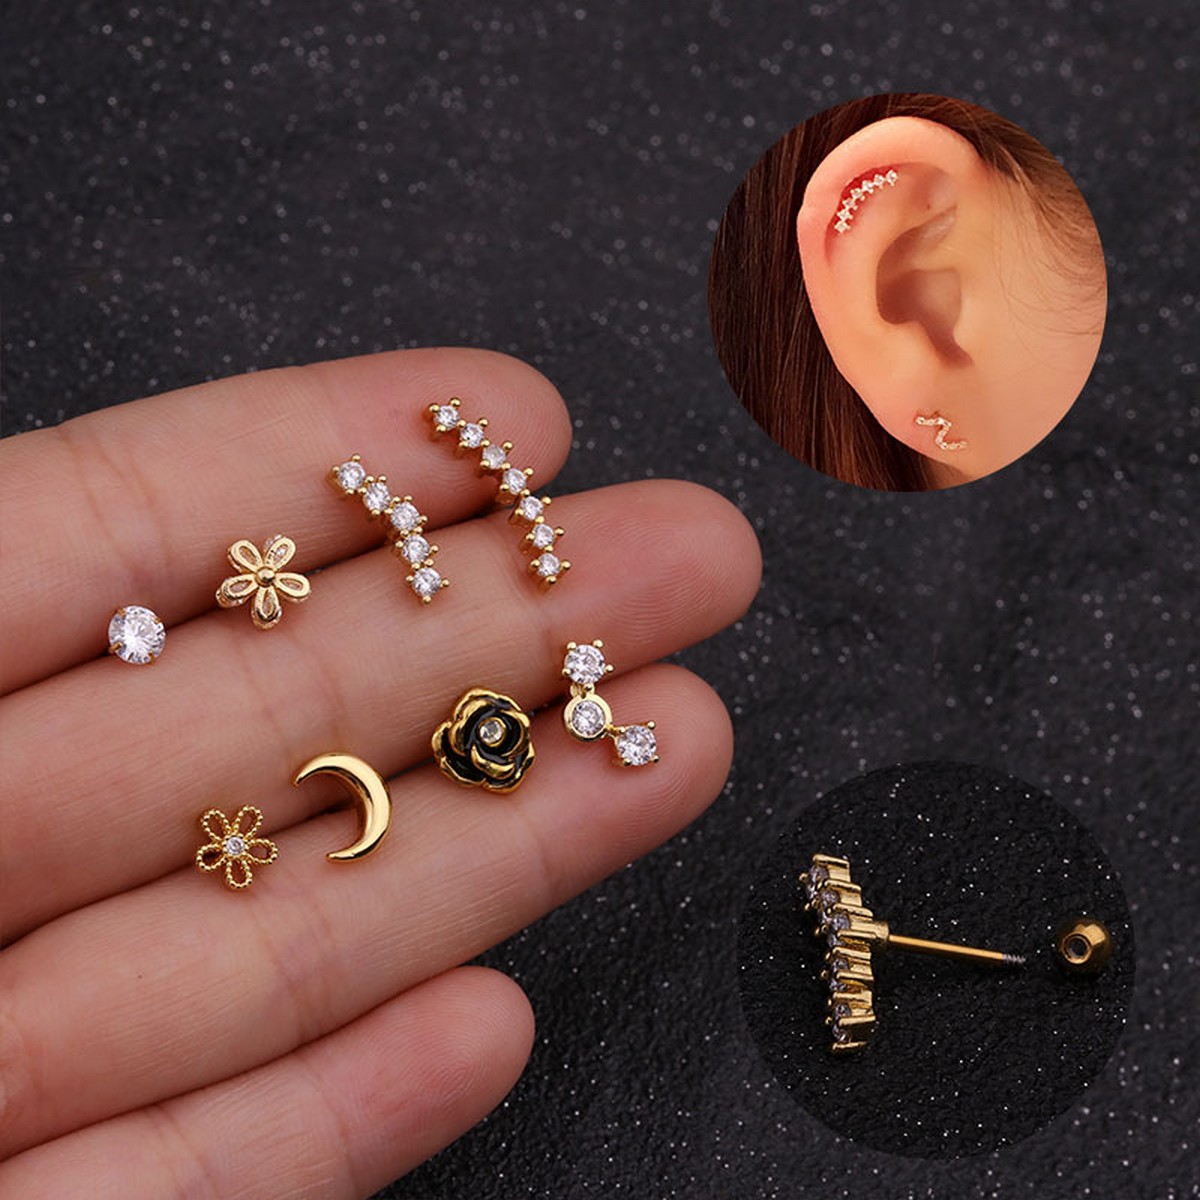 Conch Earring 18ct Gold  Smooth Finish  Curved Bar Stud  Victoria Grace  Silversmith